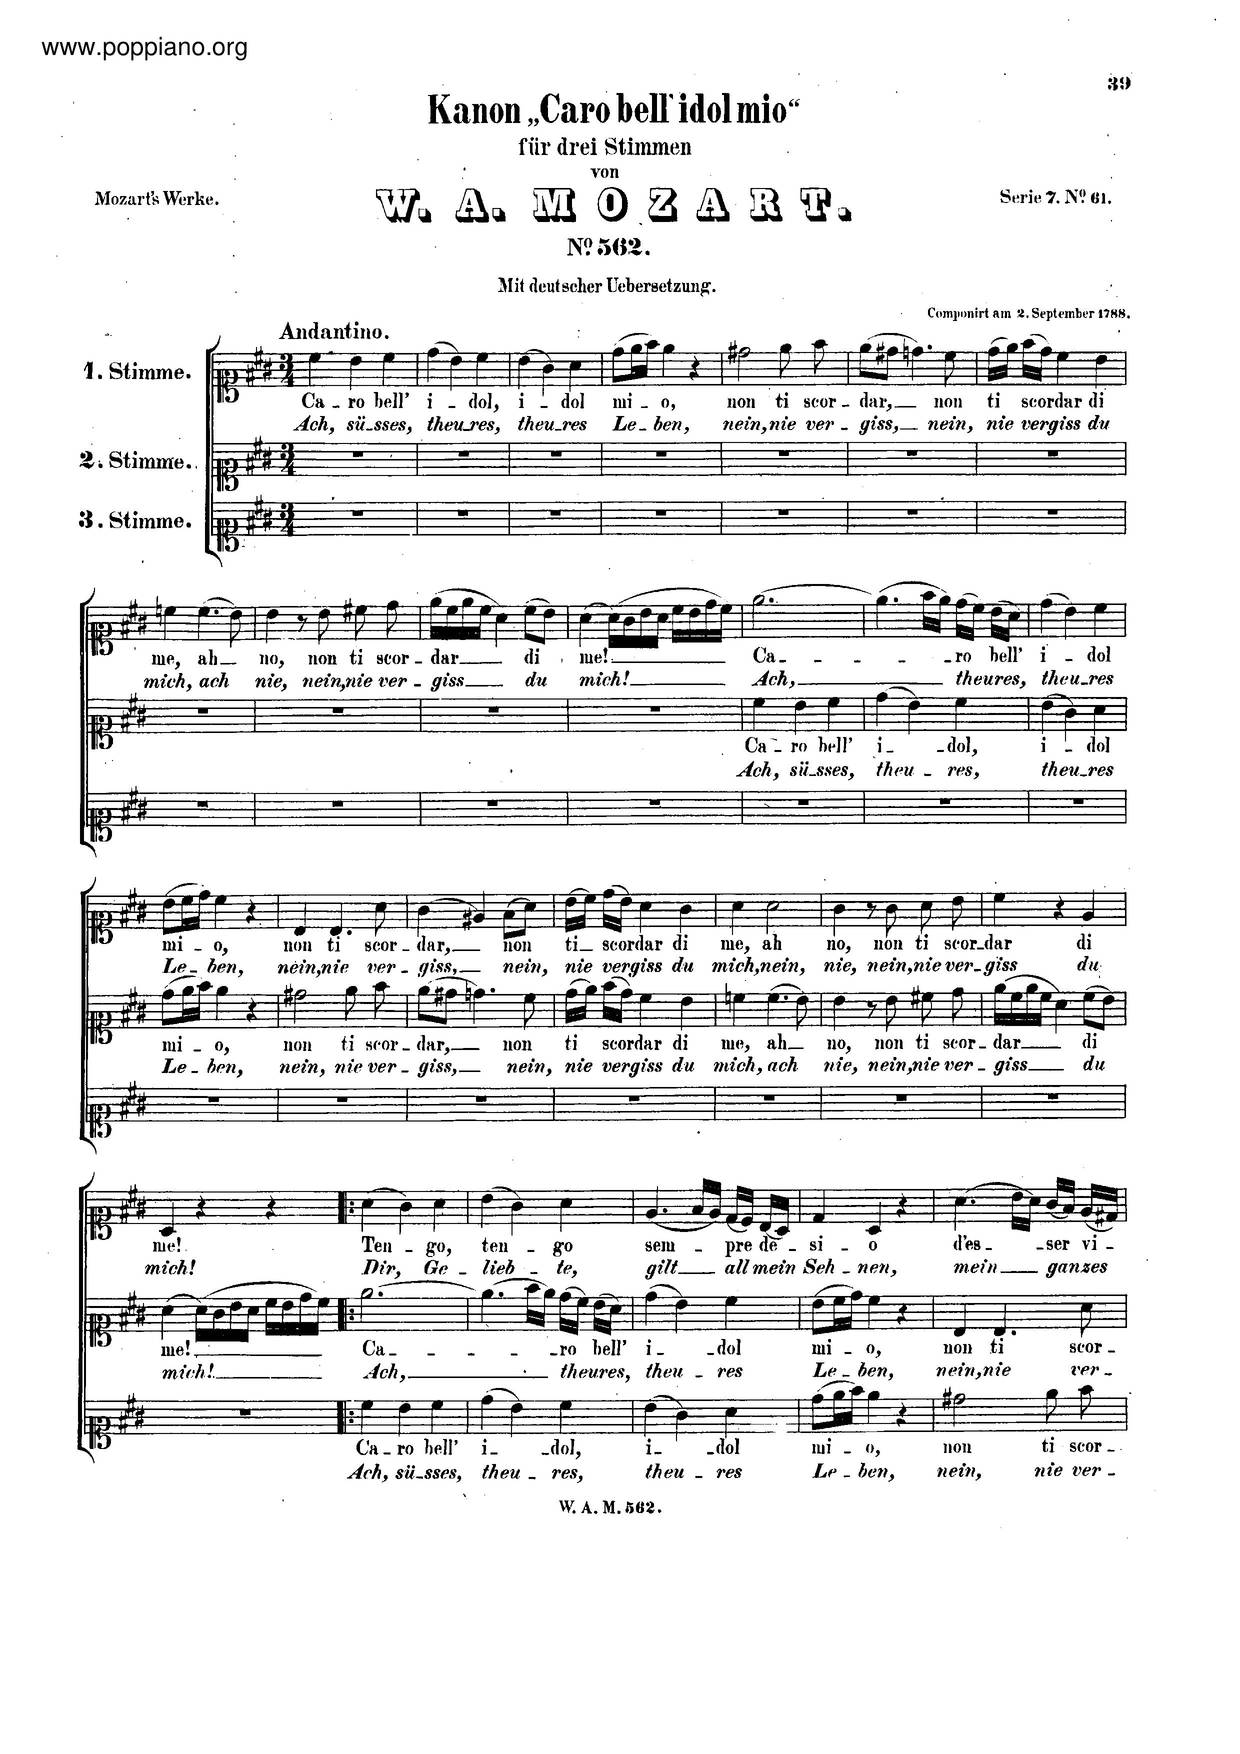 Canon For 3 Voices In A Major, K. 562 Score